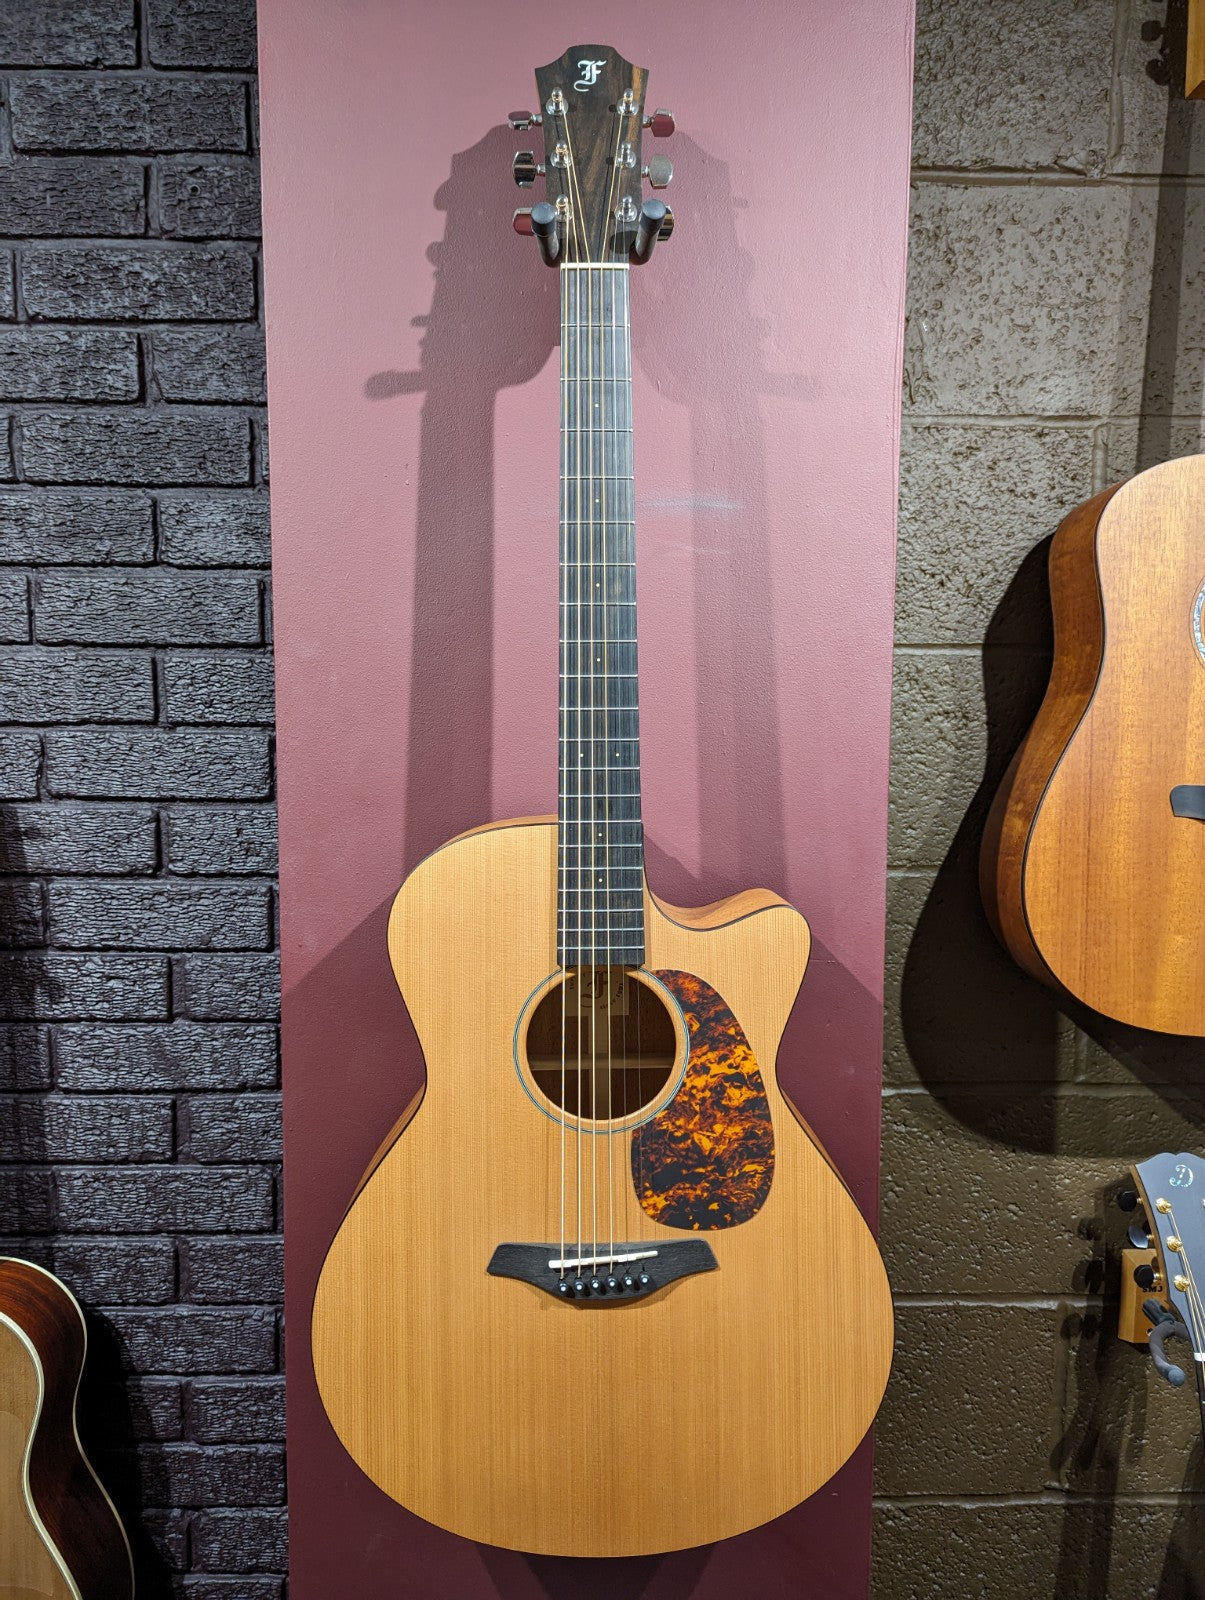 Furch G20 C/M (Used), Acoustic Guitar for sale at Richards Guitars.